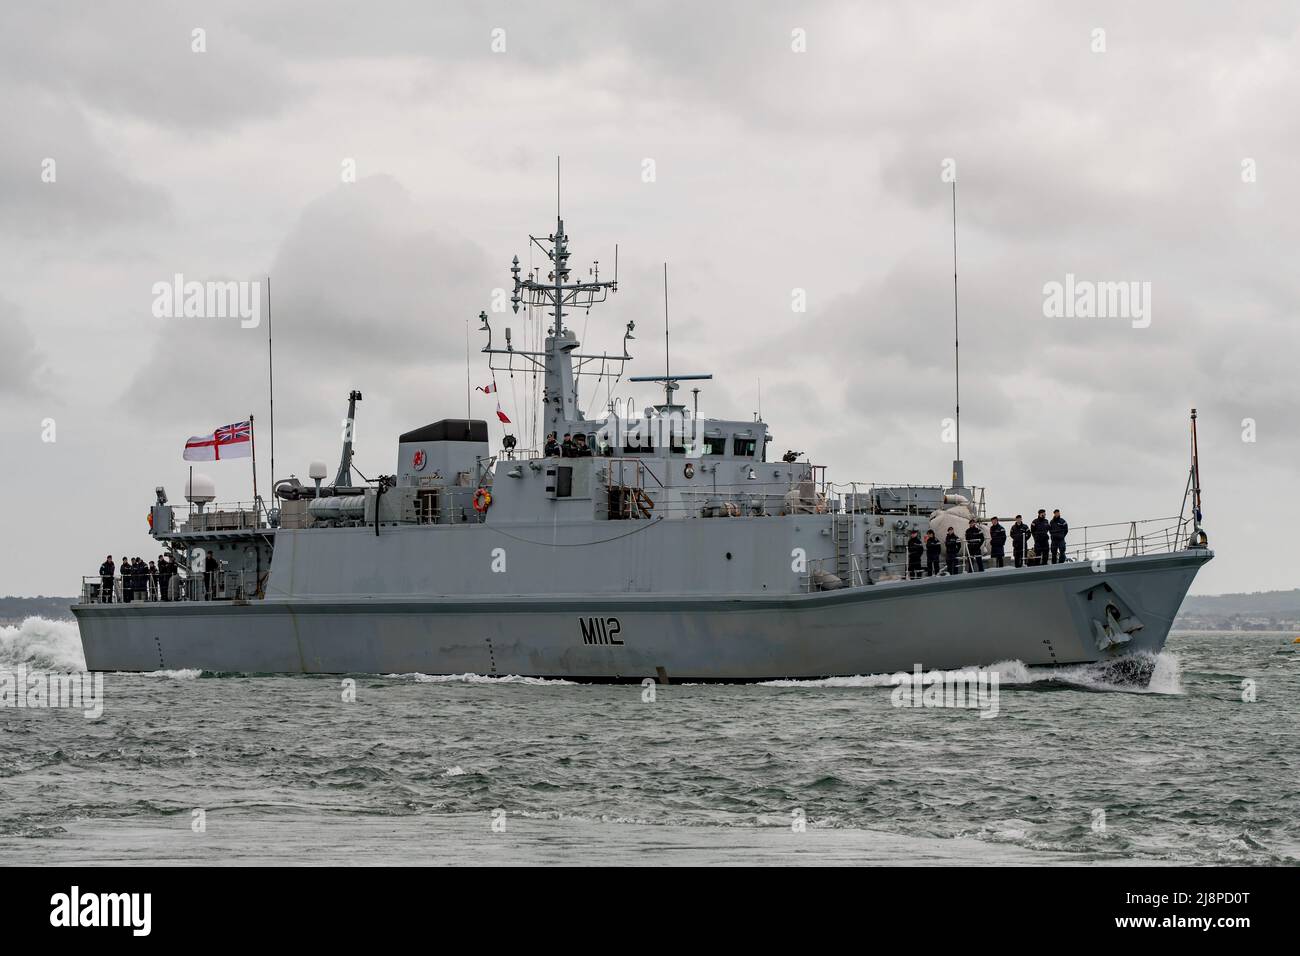 The Royal Navy mine warfare vessel HMS Shoreham (M112) approaching Portsmouth, UK on the 16th May 2022 for a rare visit prior to decommissioning. Stock Photo